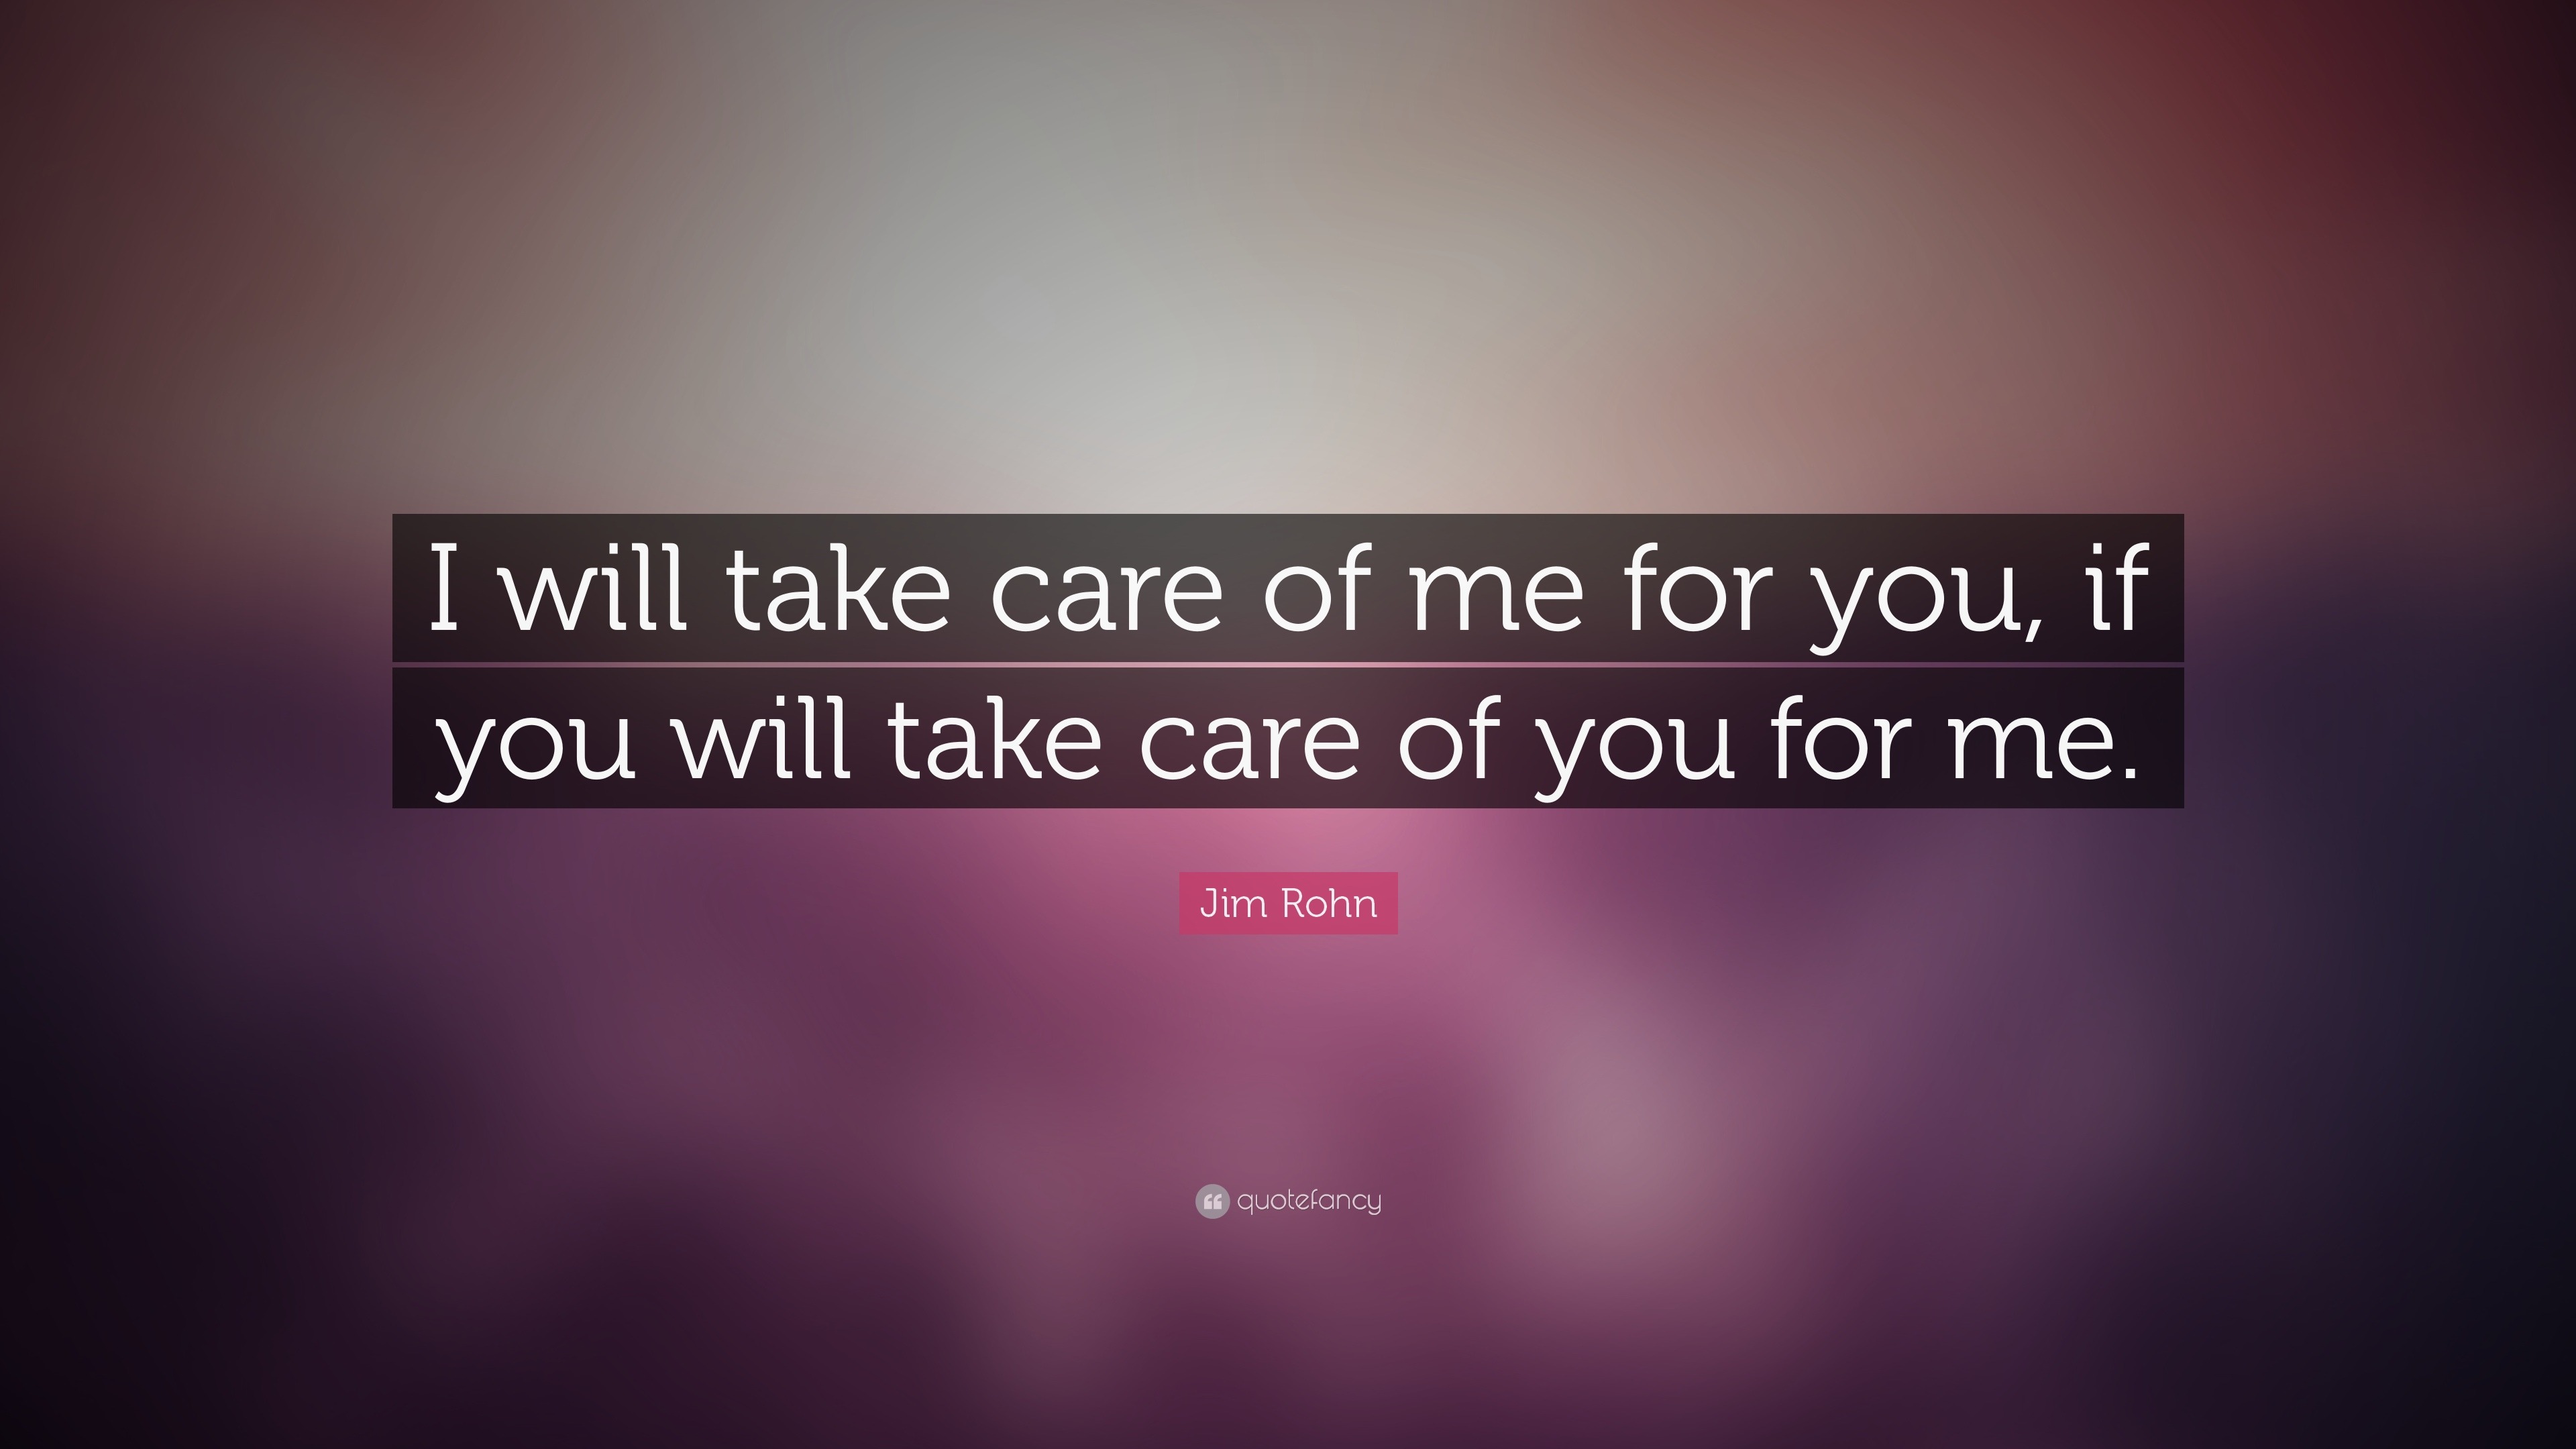 Jim Rohn Quote I will take care of me for you if you will take care 